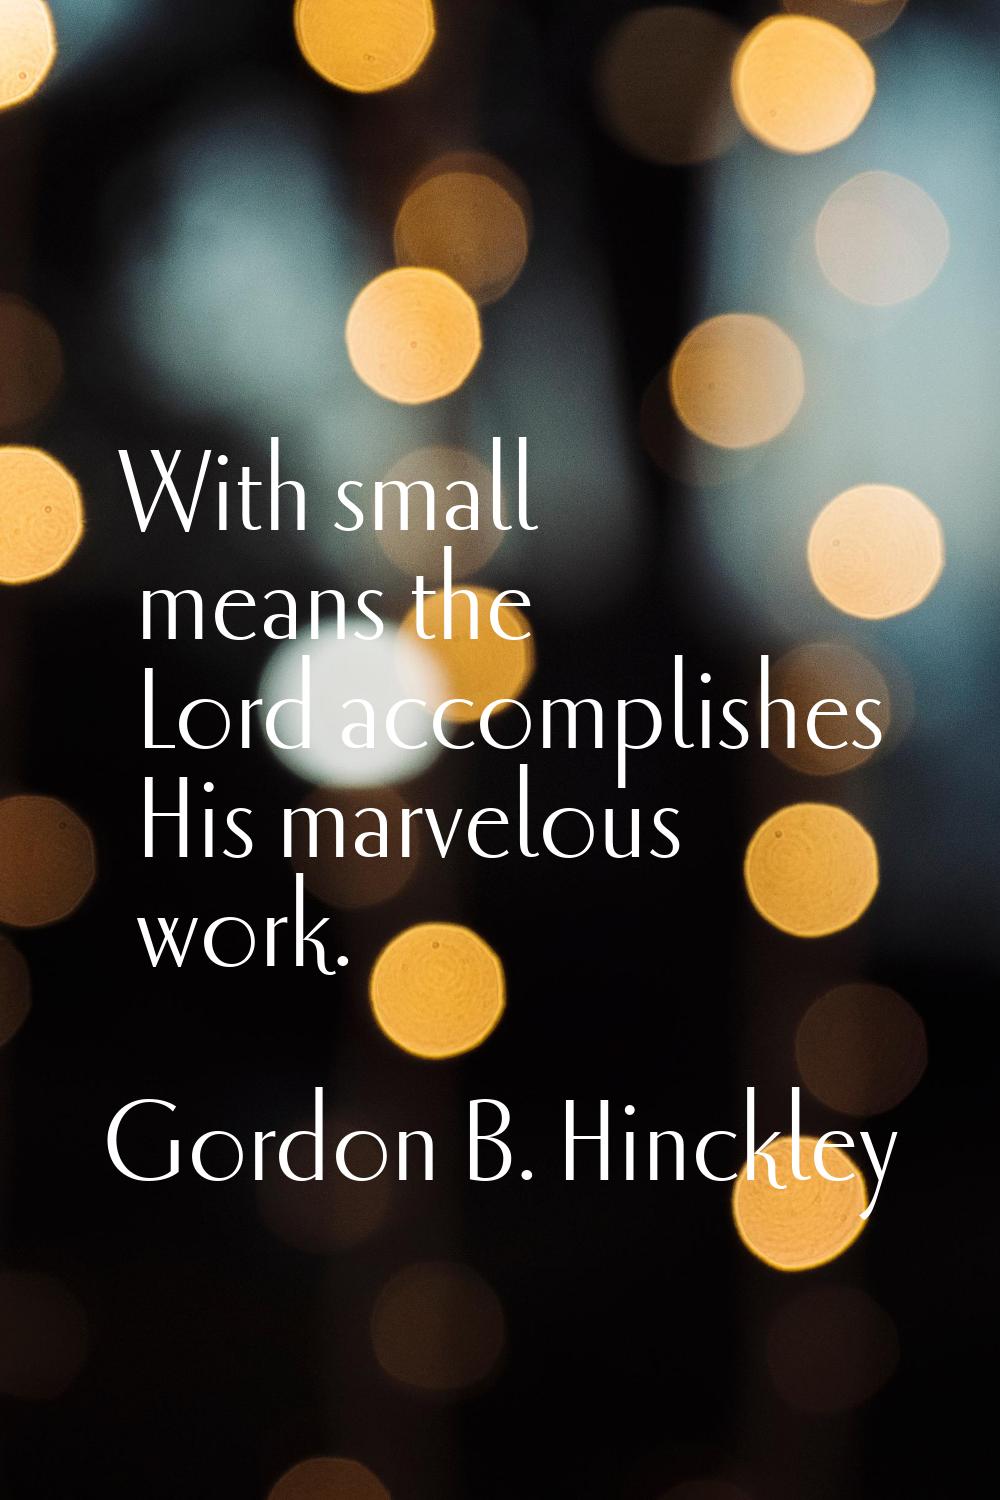 With small means the Lord accomplishes His marvelous work.